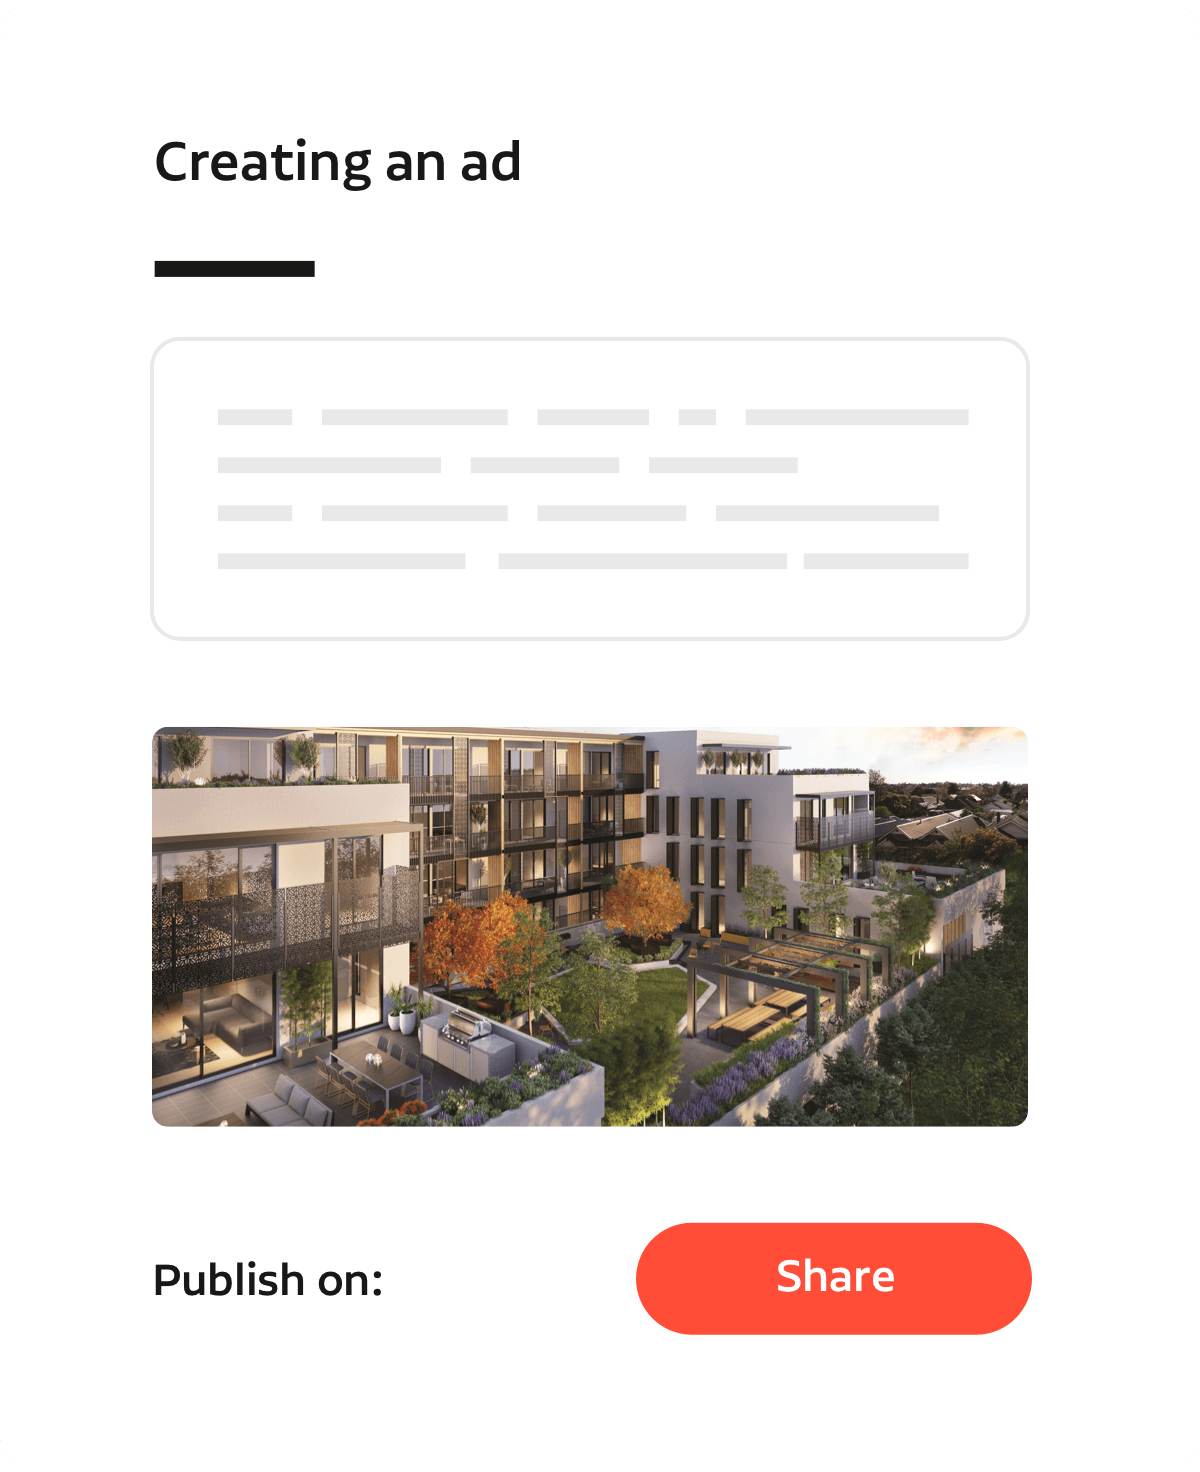 Publish your ads in a single click